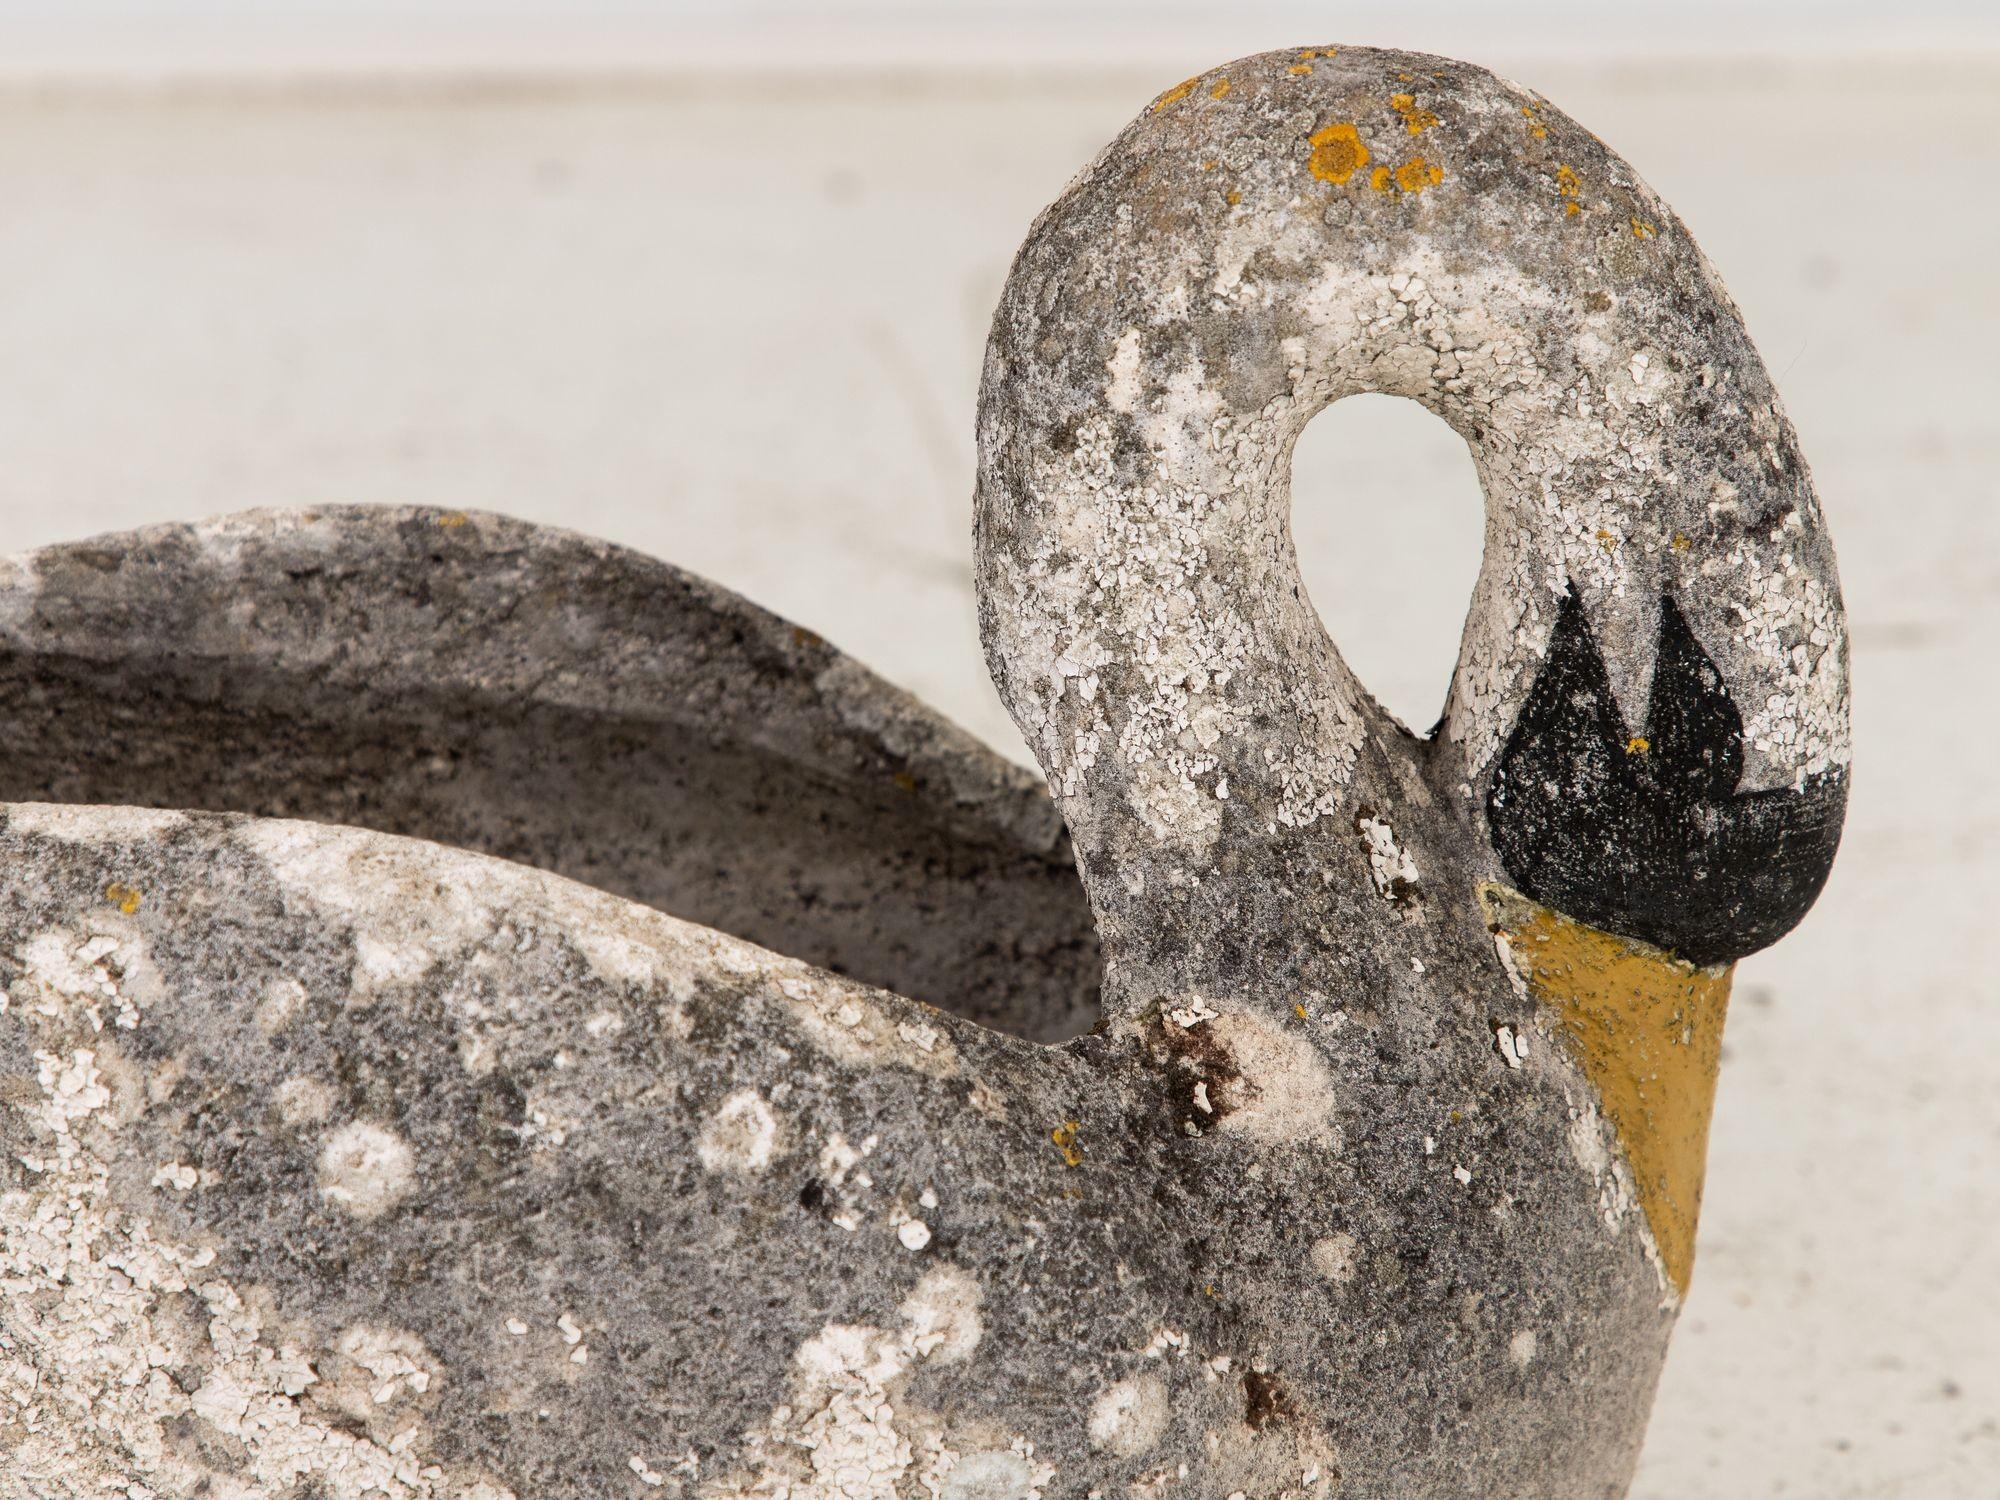 Concrete Reconstituted Stone Swan Planter, English Early 20th Century For Sale